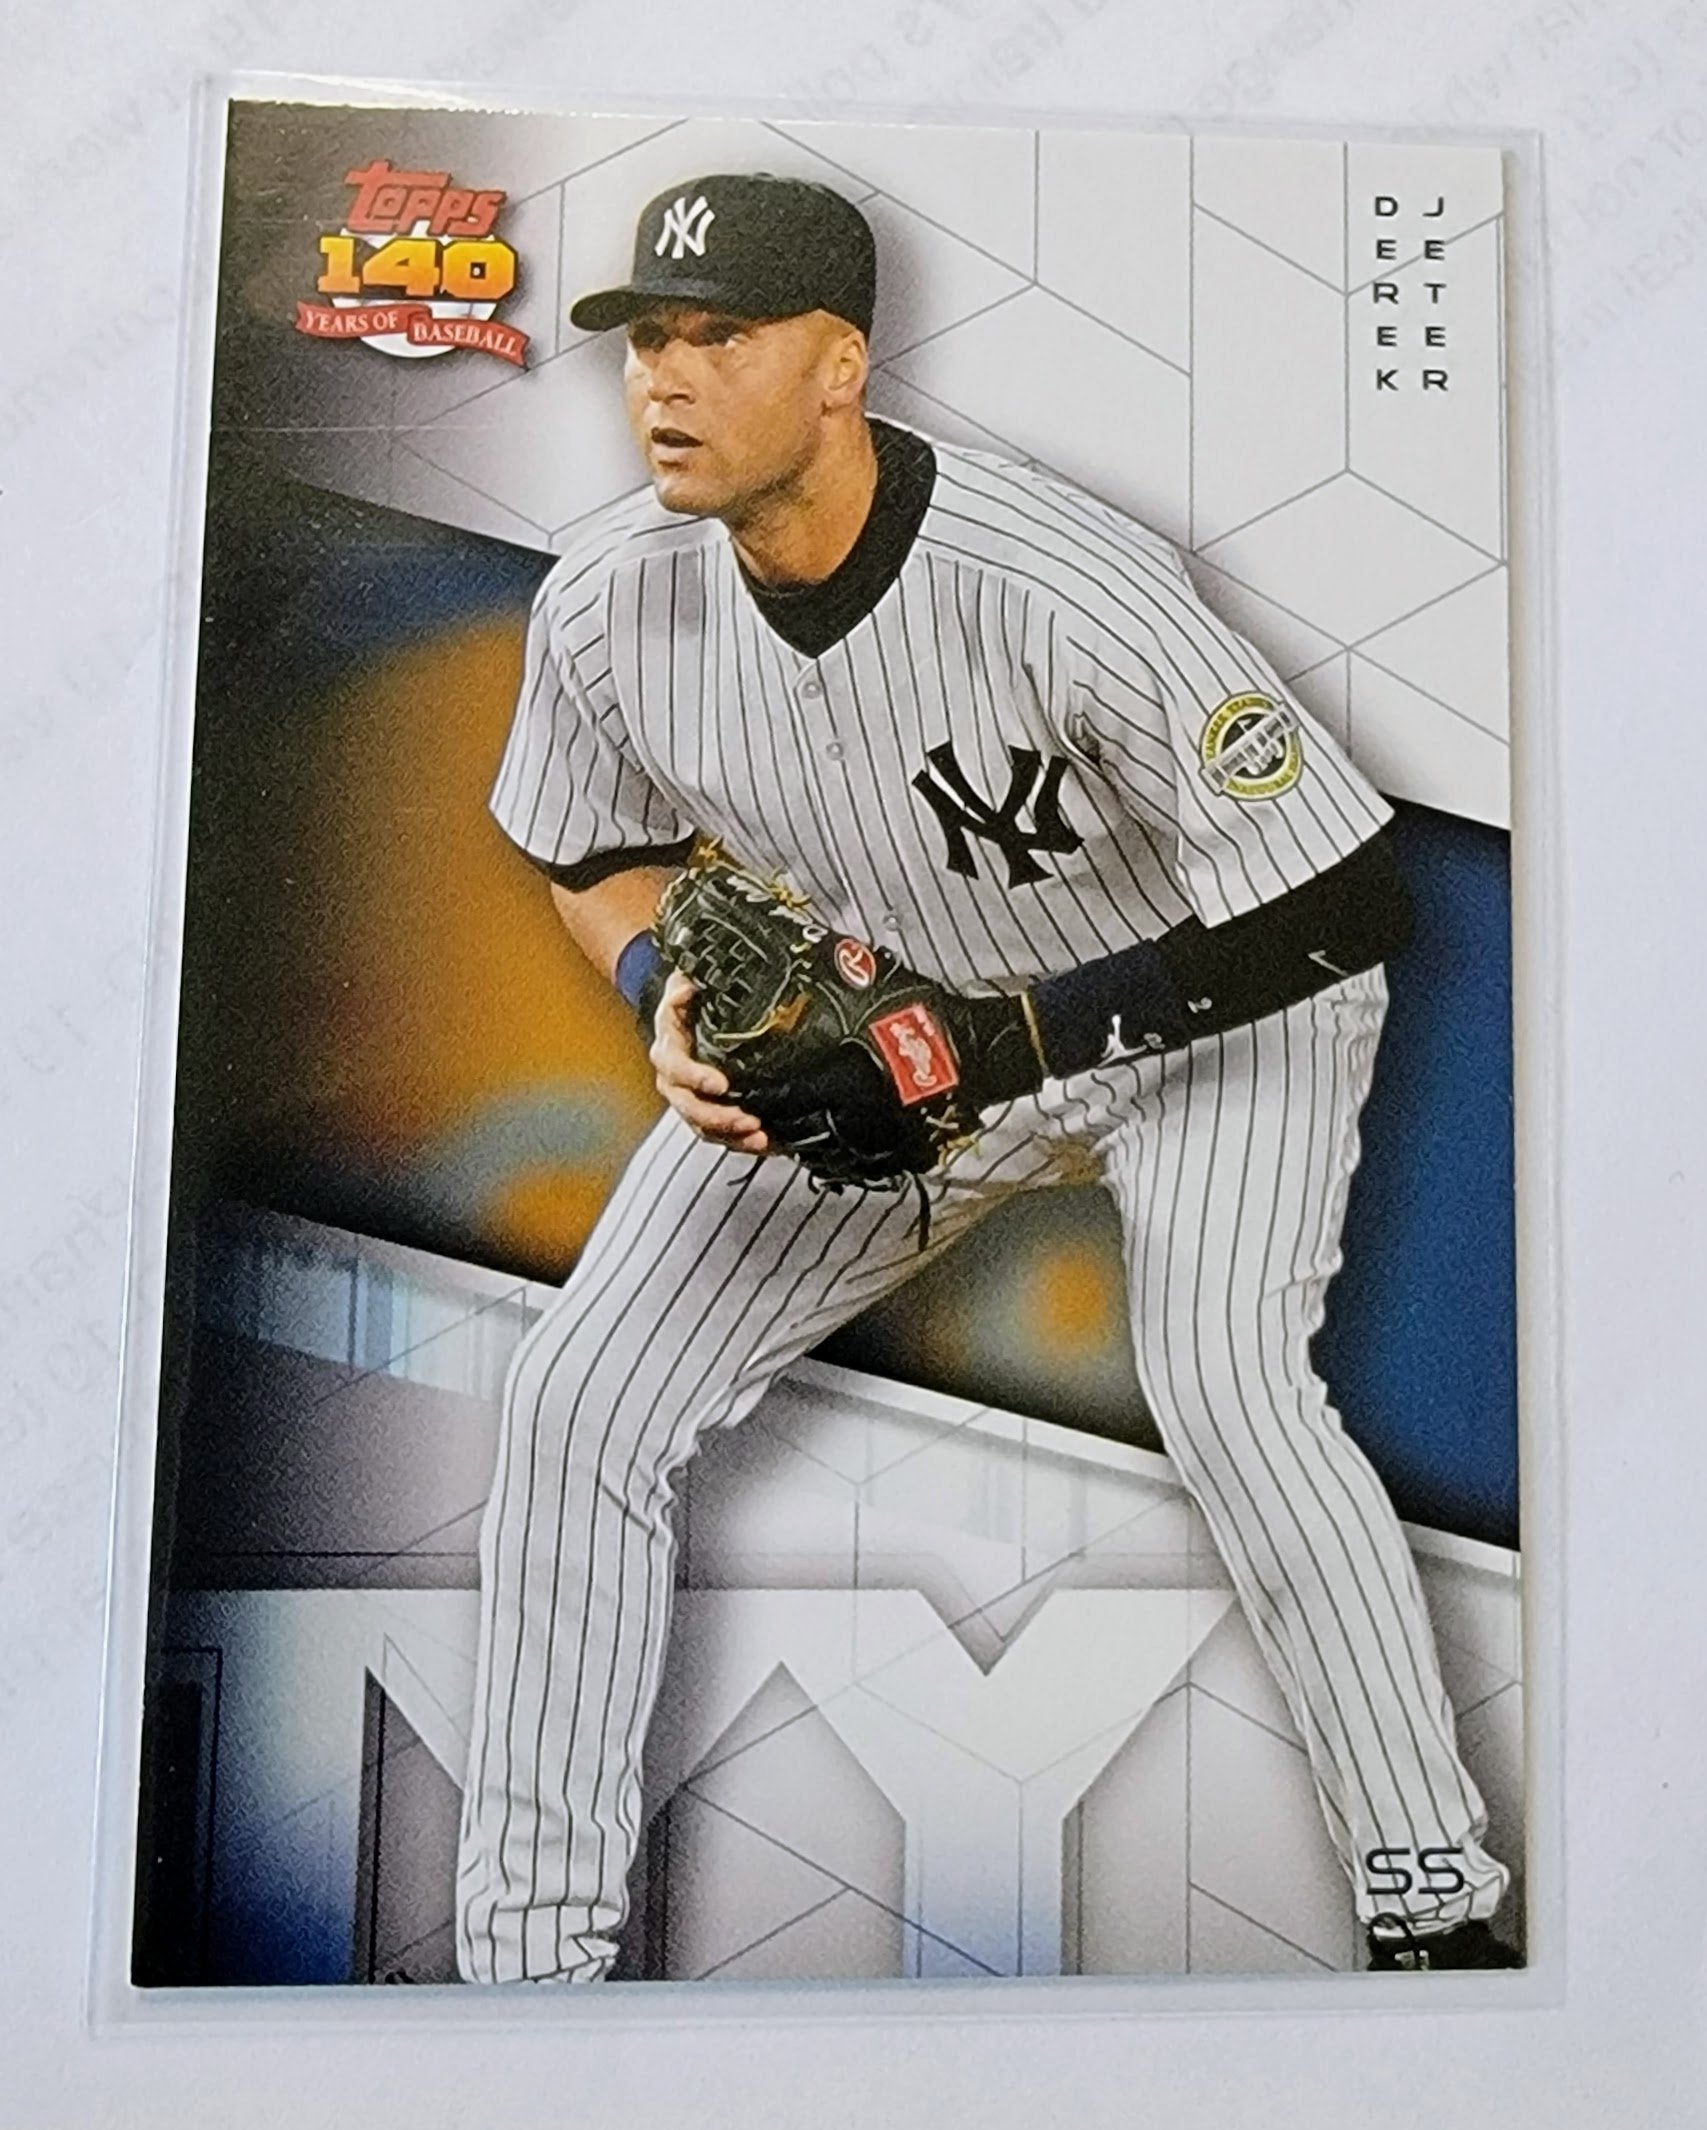 2021 Topps Archives Derek Jeter 140 Years of Baseball Trading Card SMCB1 simple Xclusive Collectibles   